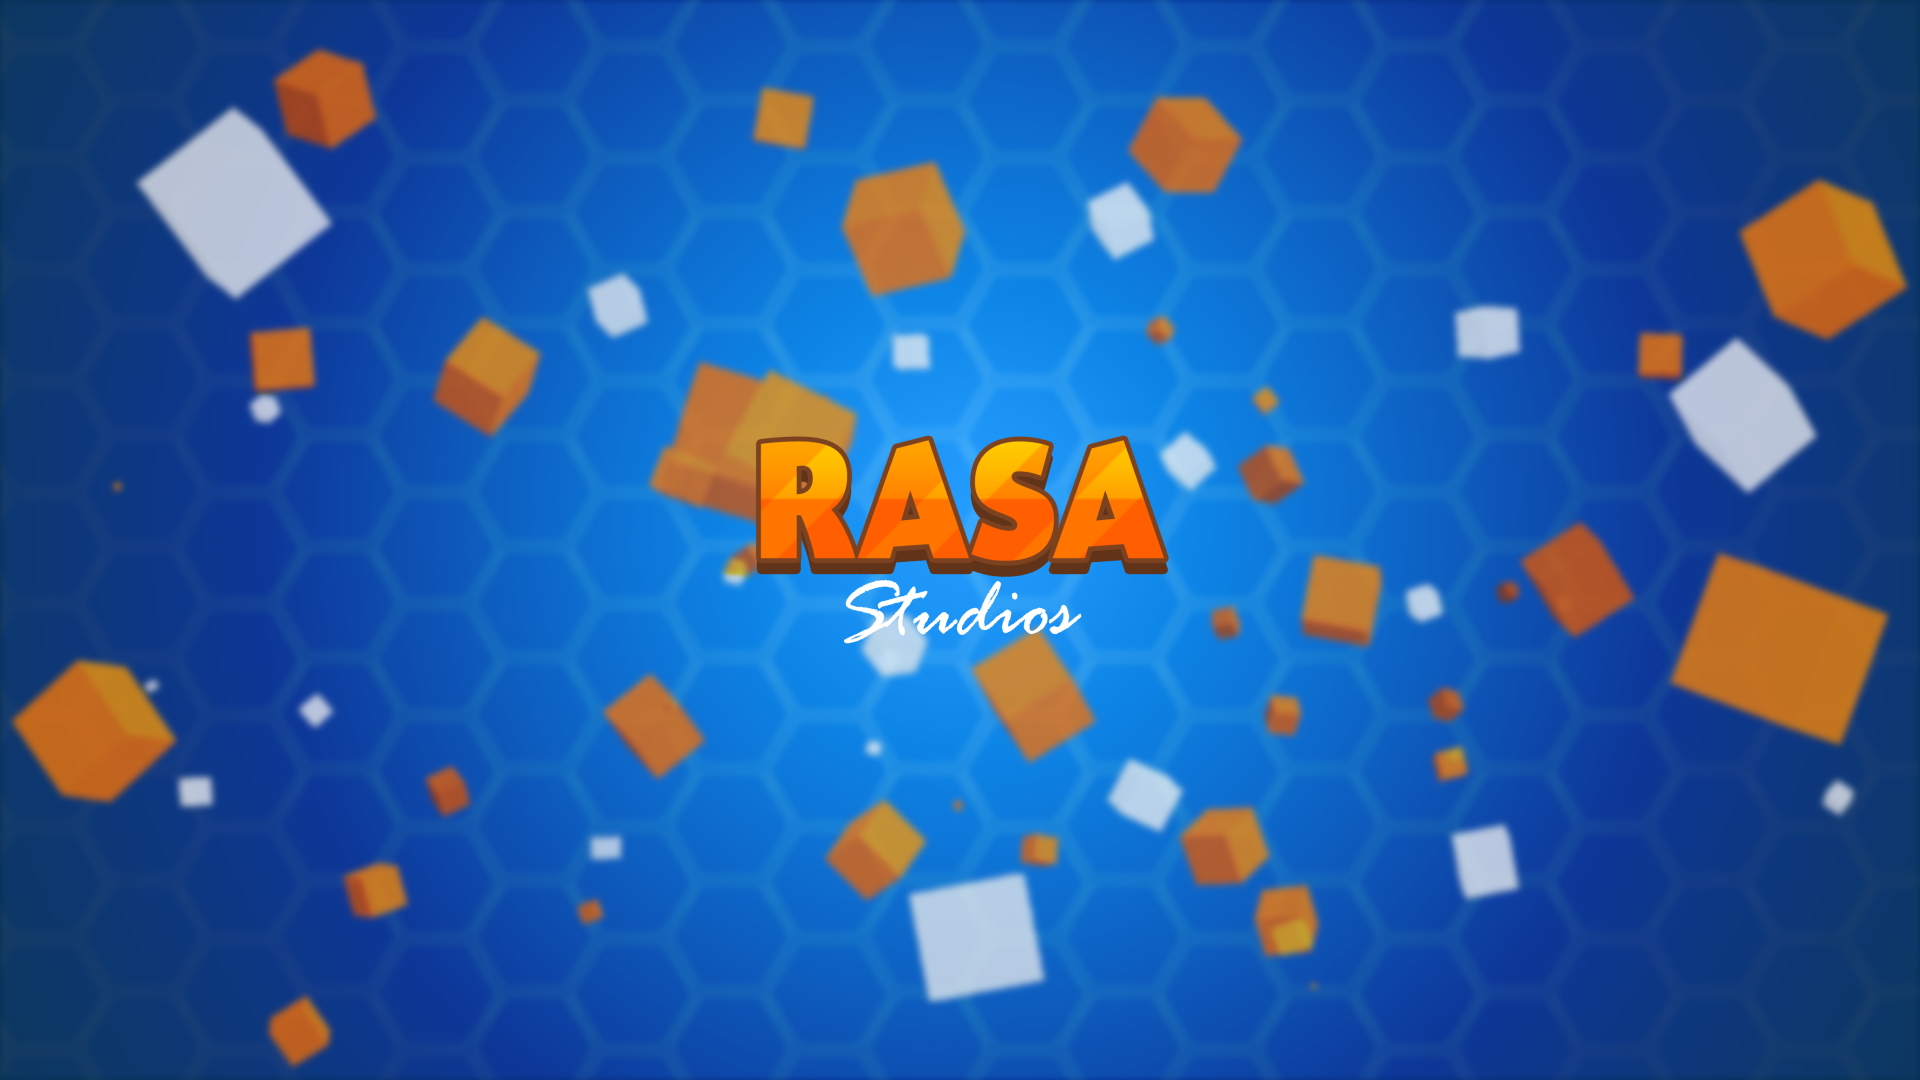 The RASA Studios logo in front of a tiled blue hexagon background. There are white and orange cubed scattered around the background in front of the hexagons.